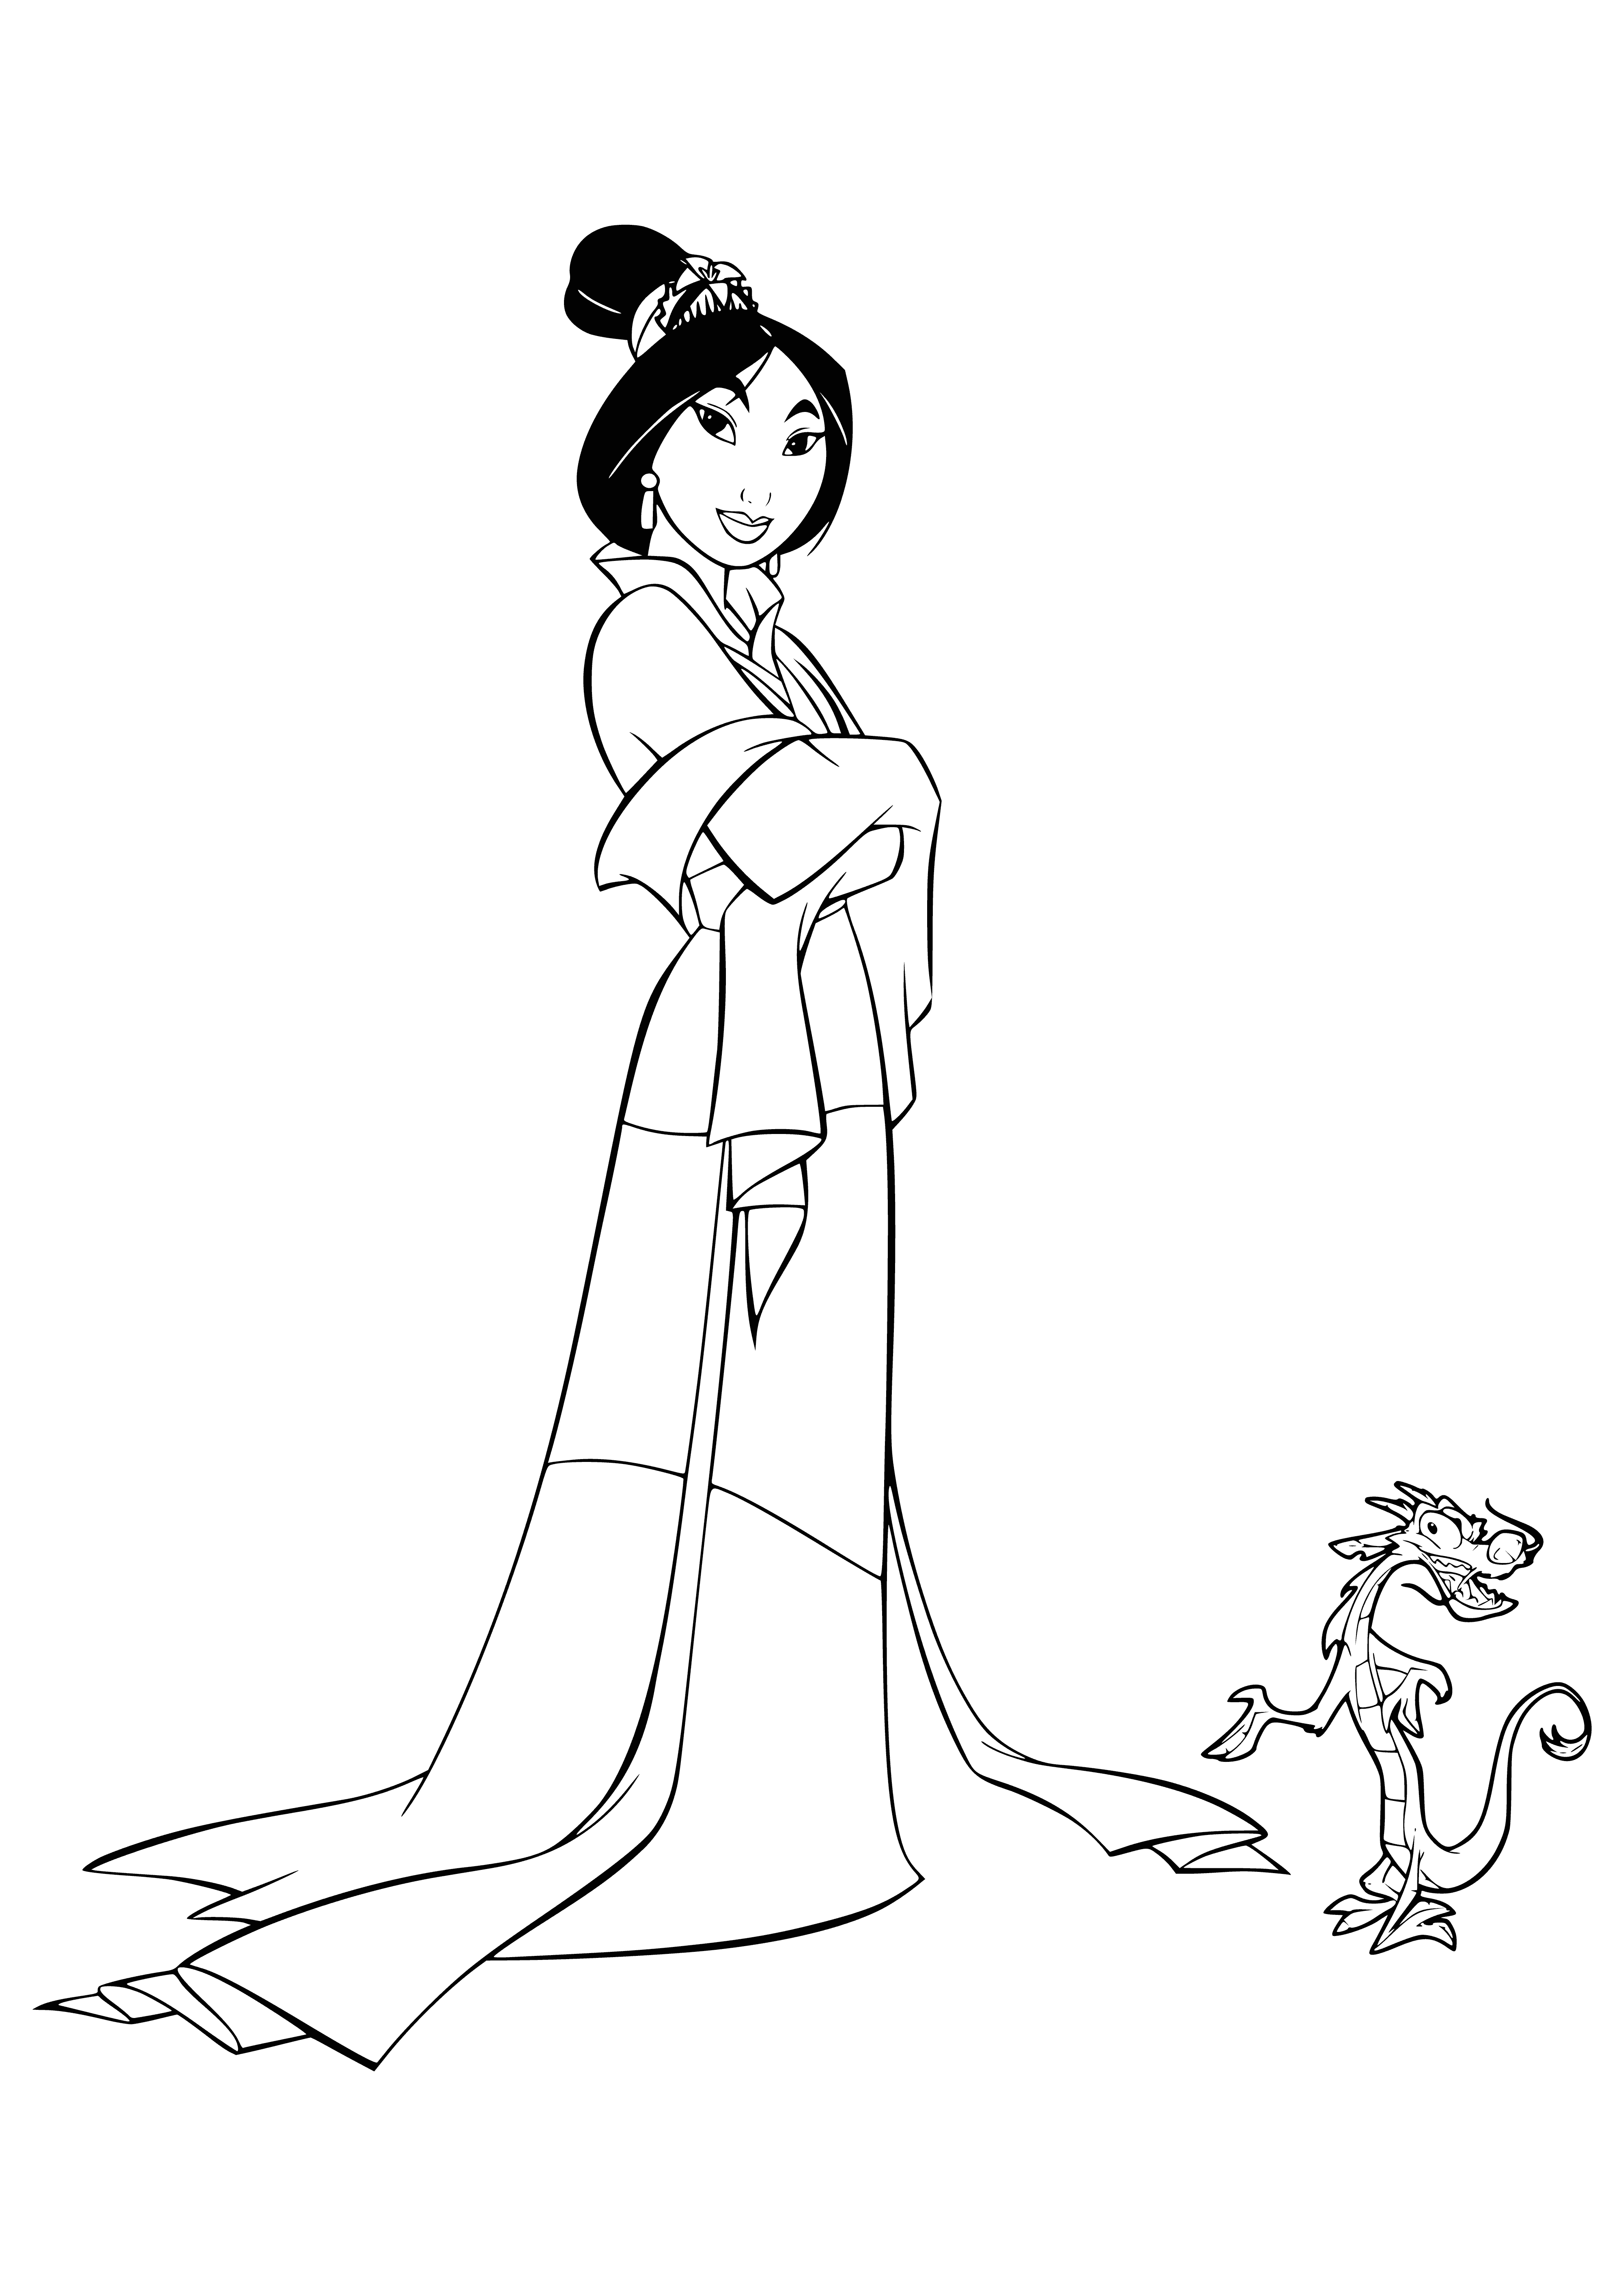 coloring page: Mulan kneels before dragon, listening intently. Dragon appears to speak, stirring serious emotion in the heroine.